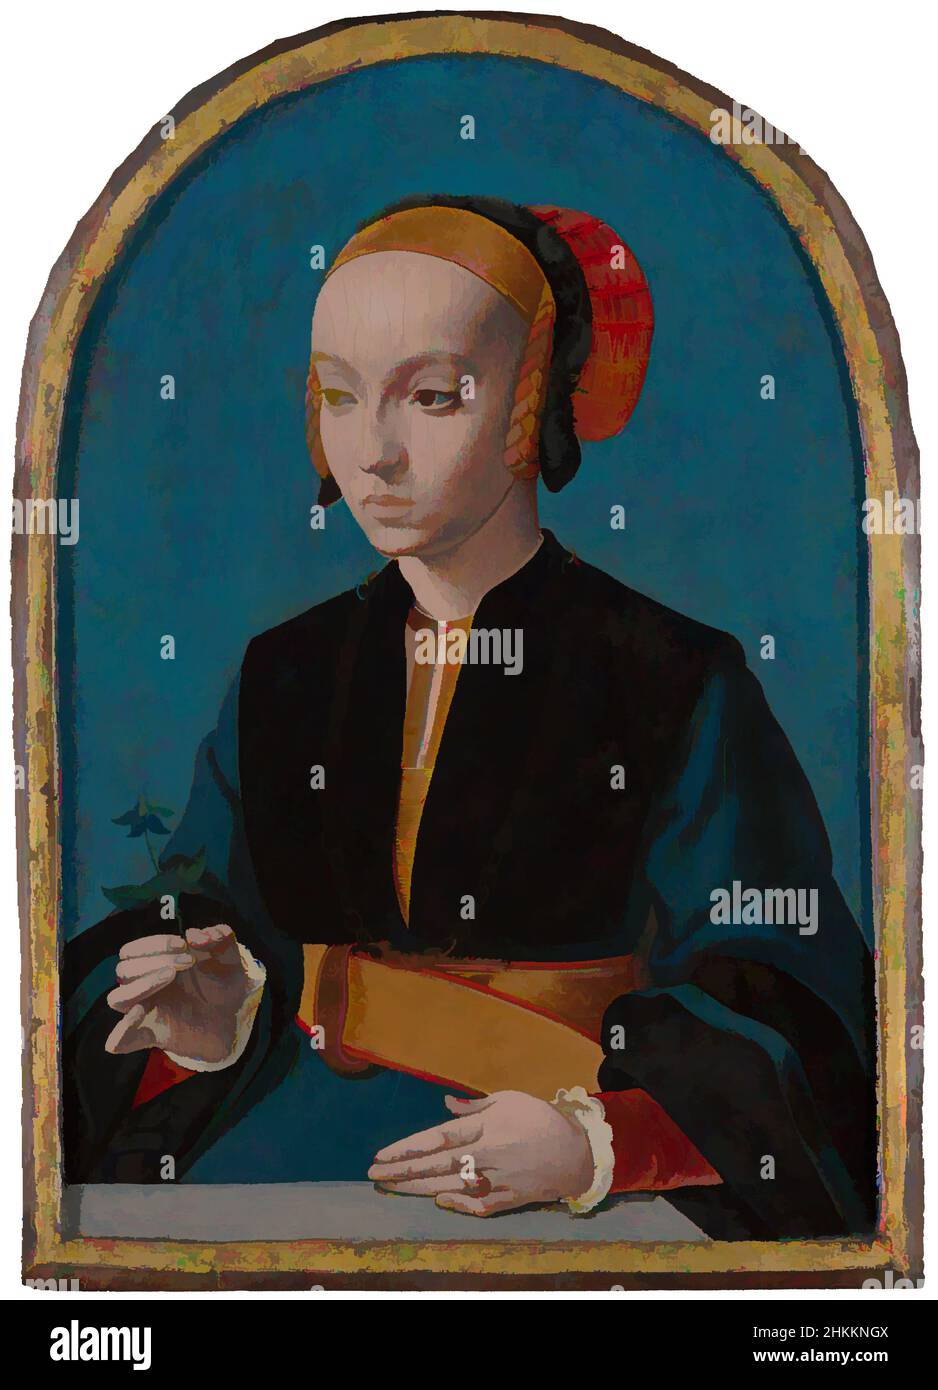 Art inspired by Portrait of Elisabeth Bellinghausen c. 1520- after 1570, Bartholomäus Bruyn de Oude, 1538 - 1539, Classic works modernized by Artotop with a splash of modernity. Shapes, color and value, eye-catching visual impact on art. Emotions through freedom of artworks in a contemporary way. A timeless message pursuing a wildly creative new direction. Artists turning to the digital medium and creating the Artotop NFT Stock Photo